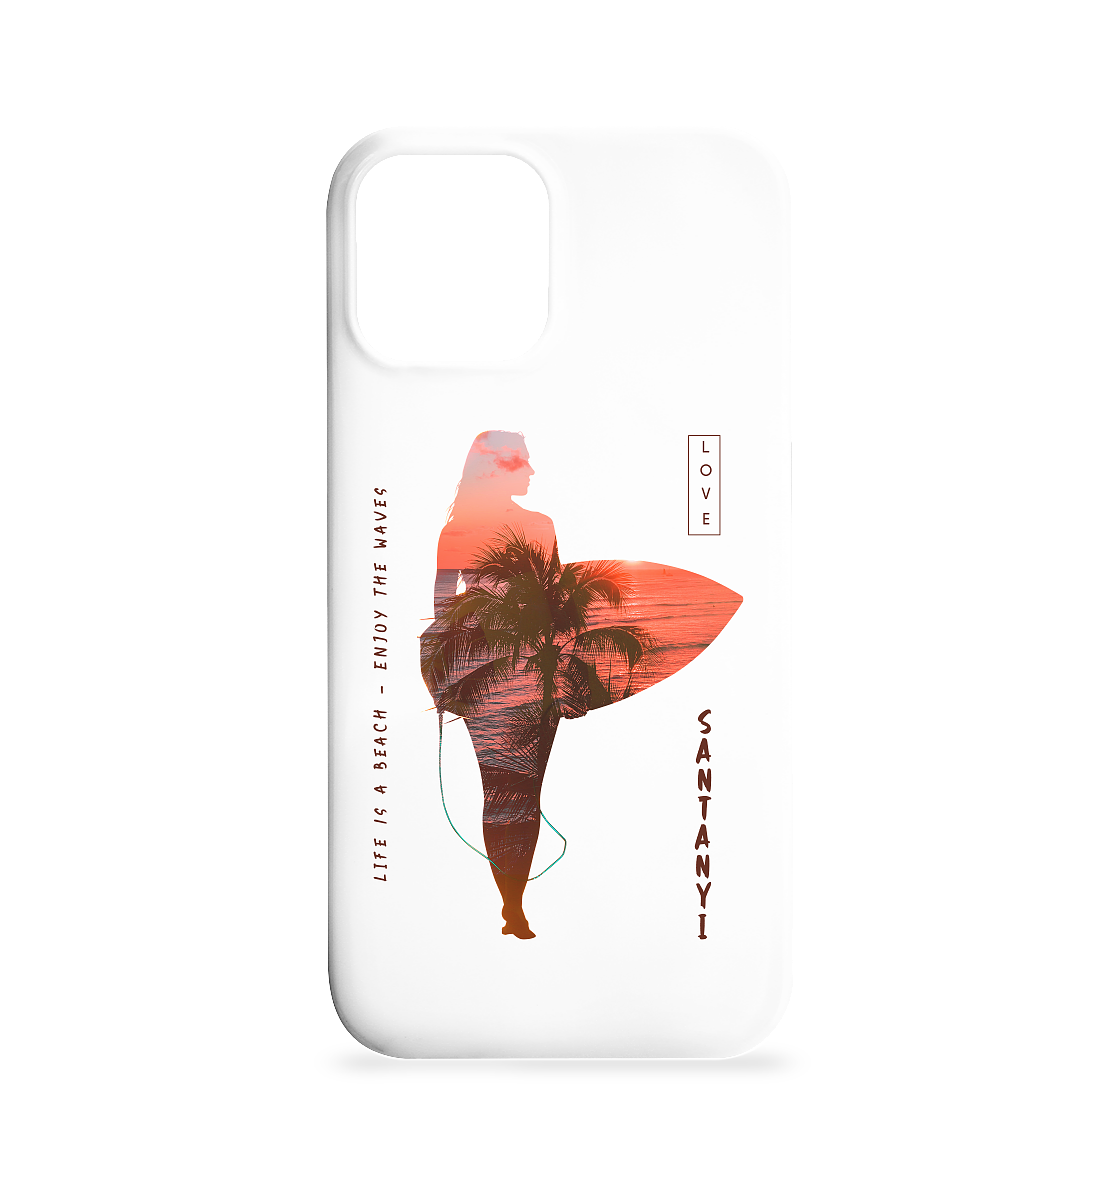 Life is a beach - Enjoy the waves • Iphone 12 / 12 Pro Handyhülle • Personalisierbar!